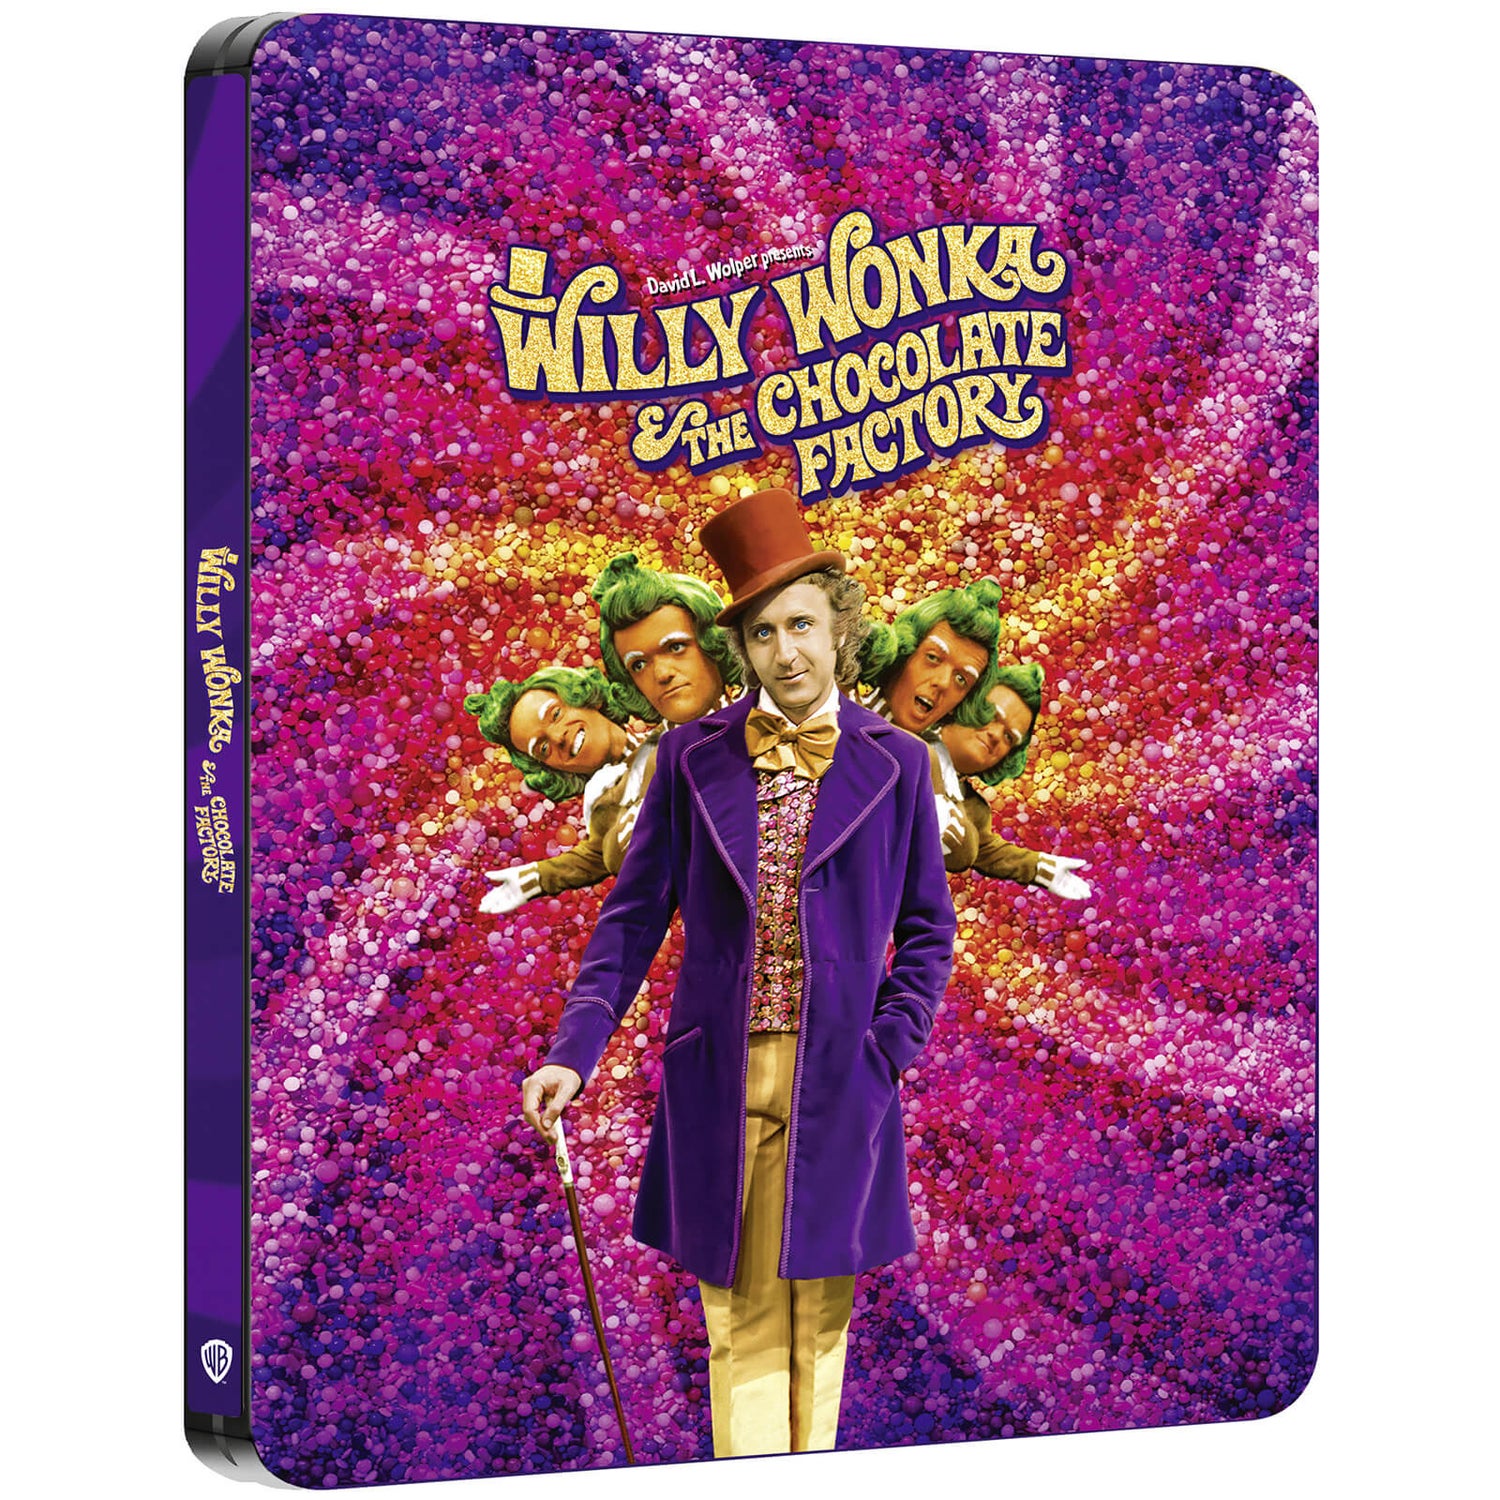 Willy Wonka & the Chocolate Factory Zavvi Exclusive 4K Ultra HD